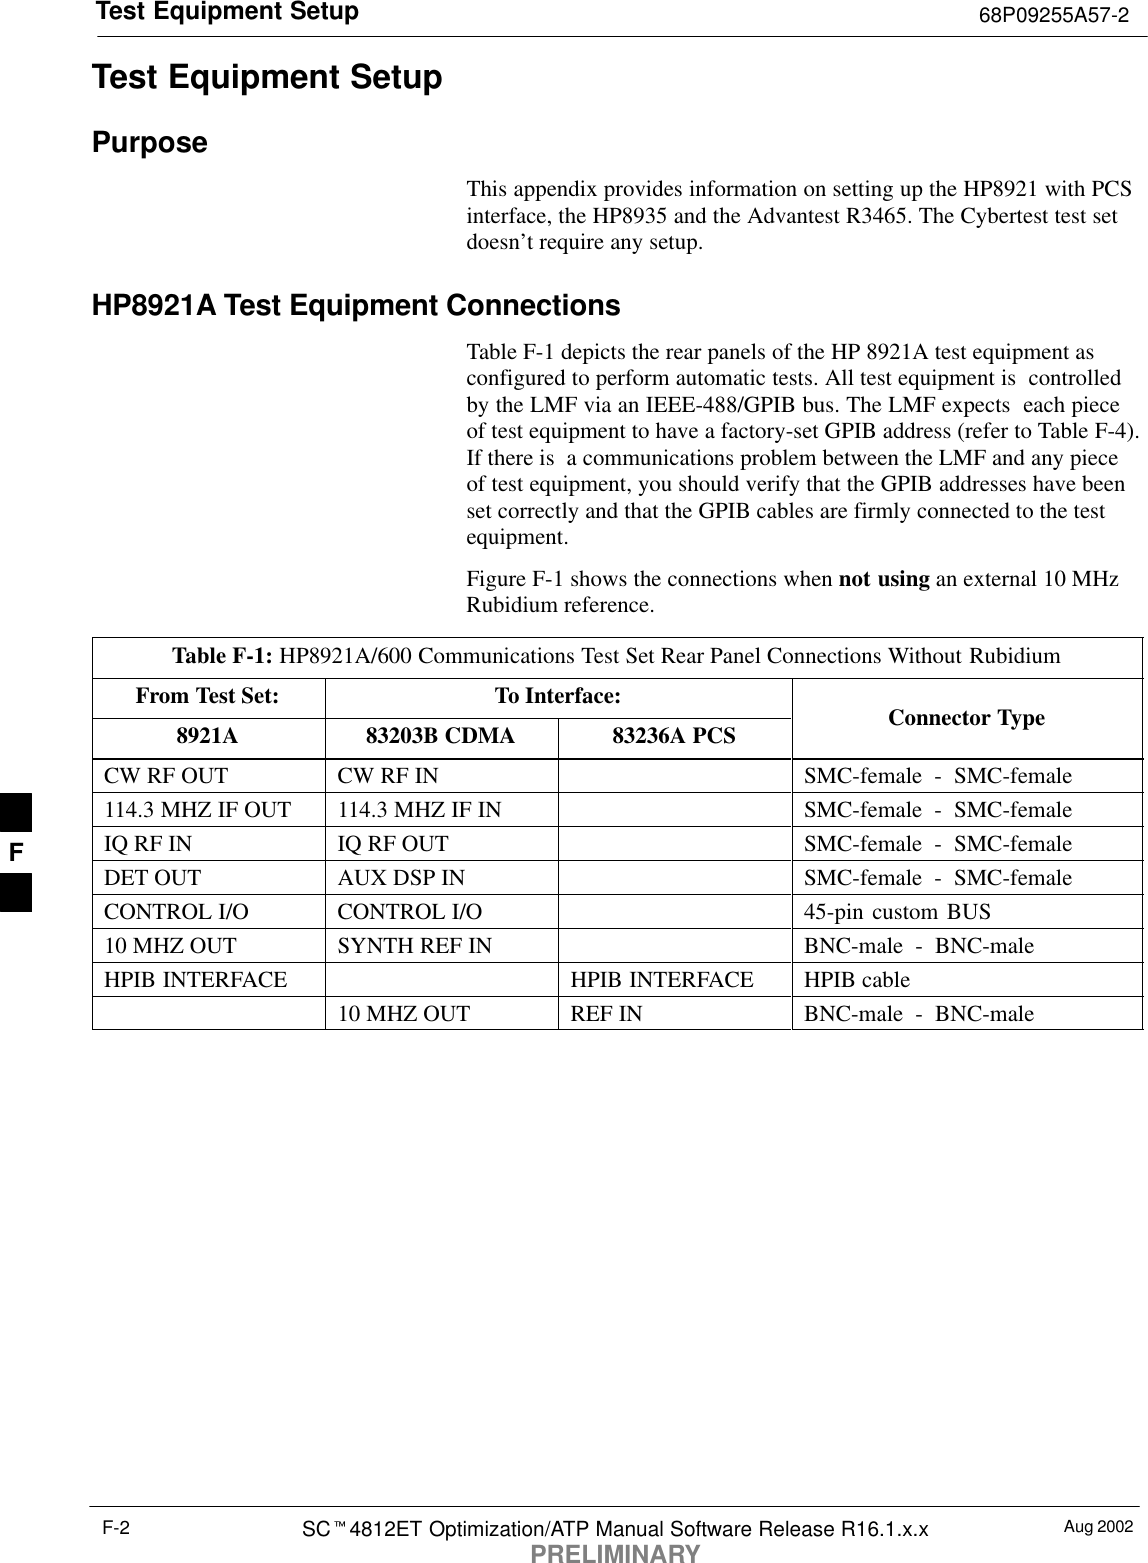 Test Equipment Setup 68P09255A57-2Aug 2002SCt4812ET Optimization/ATP Manual Software Release R16.1.x.xPRELIMINARYF-2Test Equipment SetupPurposeThis appendix provides information on setting up the HP8921 with PCSinterface, the HP8935 and the Advantest R3465. The Cybertest test setdoesn’t require any setup.HP8921A Test Equipment ConnectionsTable F-1 depicts the rear panels of the HP 8921A test equipment asconfigured to perform automatic tests. All test equipment is  controlledby the LMF via an IEEE-488/GPIB bus. The LMF expects  each pieceof test equipment to have a factory-set GPIB address (refer to Table F-4).If there is  a communications problem between the LMF and any pieceof test equipment, you should verify that the GPIB addresses have beenset correctly and that the GPIB cables are firmly connected to the testequipment.Figure F-1 shows the connections when not using an external 10 MHzRubidium reference.Table F-1: HP8921A/600 Communications Test Set Rear Panel Connections Without RubidiumFrom Test Set: To Interface:8921A 83203B CDMA 83236A PCS Connector TypeCW RF OUT CW RF IN SMC-female - SMC-female114.3 MHZ IF OUT 114.3 MHZ IF IN SMC-female - SMC-femaleIQ RF IN IQ RF OUT SMC-female - SMC-femaleDET OUT AUX DSP IN SMC-female - SMC-femaleCONTROL I/O CONTROL I/O 45-pin custom BUS10 MHZ OUT SYNTH REF IN BNC-male - BNC-maleHPIB INTERFACE HPIB INTERFACE HPIB cable10 MHZ OUT REF IN BNC-male - BNC-maleF